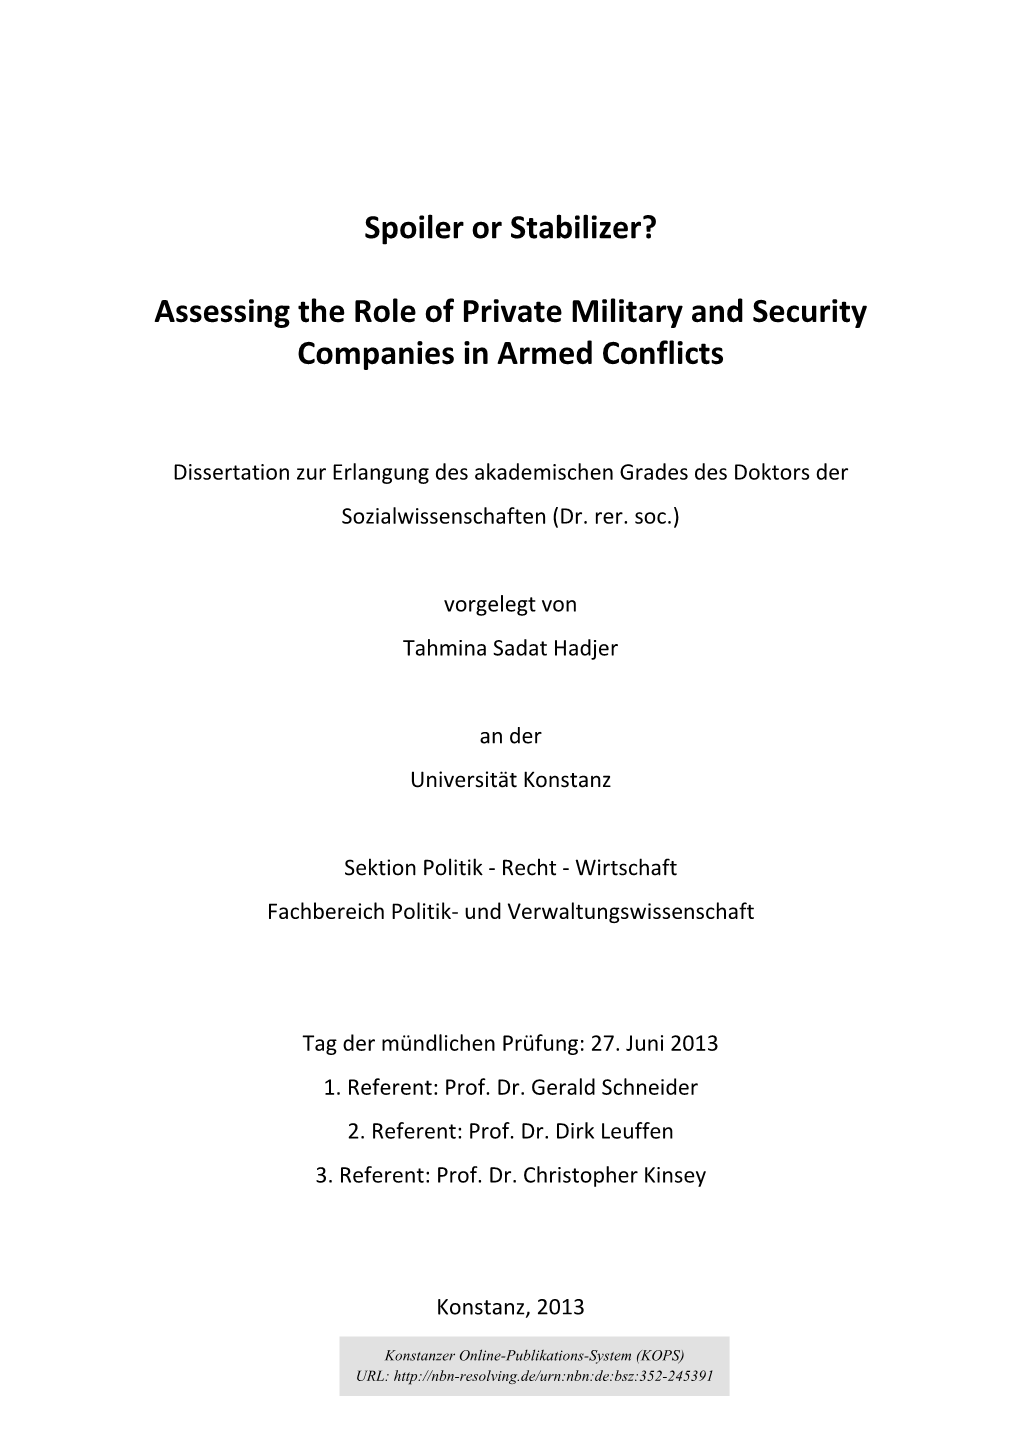 Assessing the Role of Private Military and Security Companies in Armed Conflicts